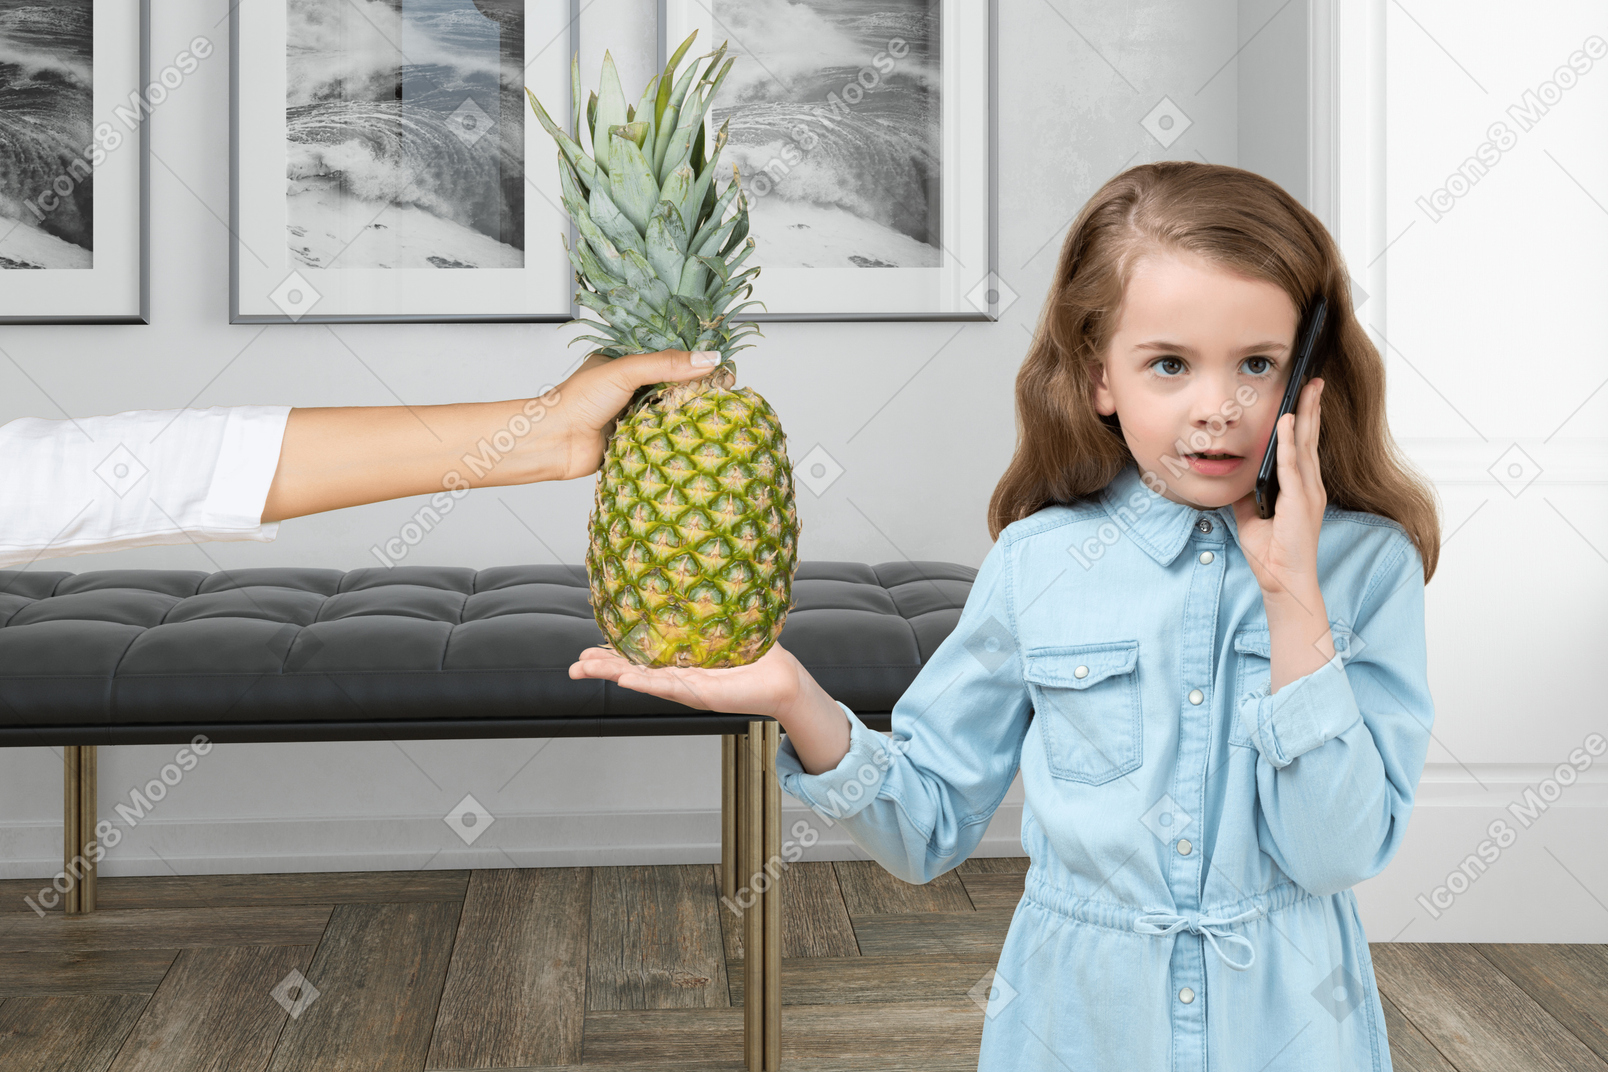 Girl with pineapple